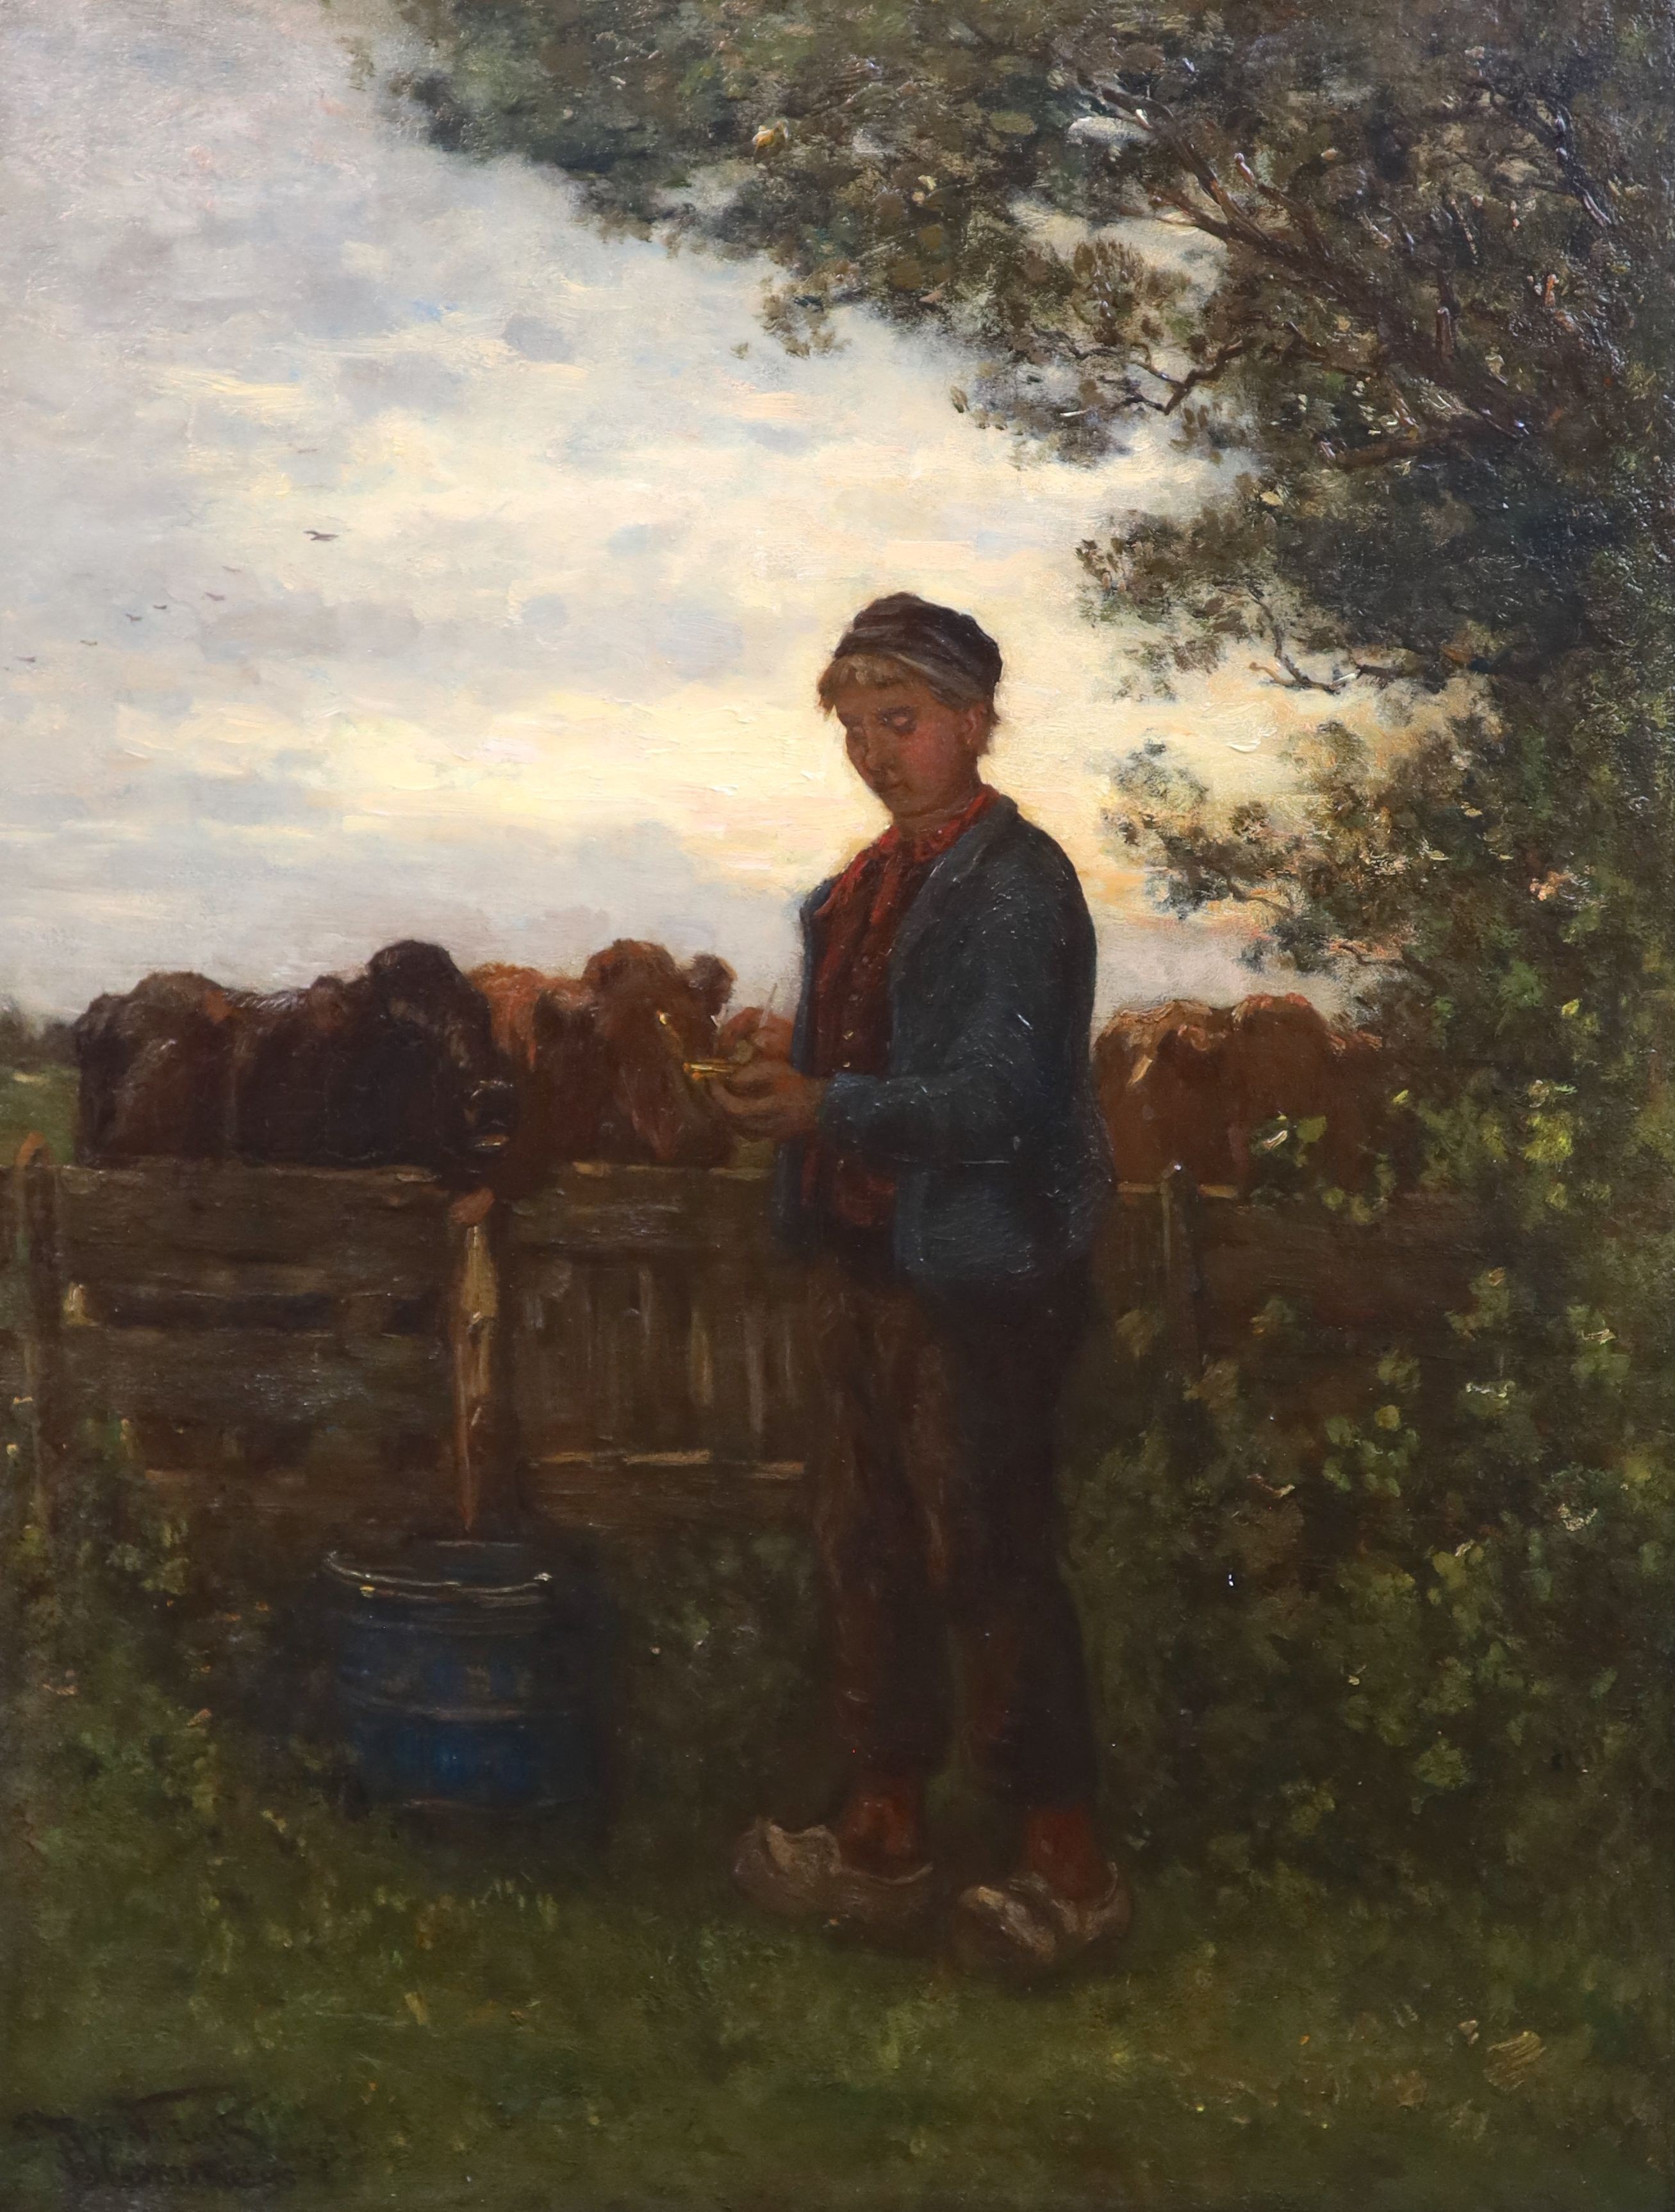 Bernardus Johannes Blommers (Dutch, 1845 - 1914), Farm hand taking a pinch of snuff with calves onlooking, oil on mahogany panel, 63 x 48cm